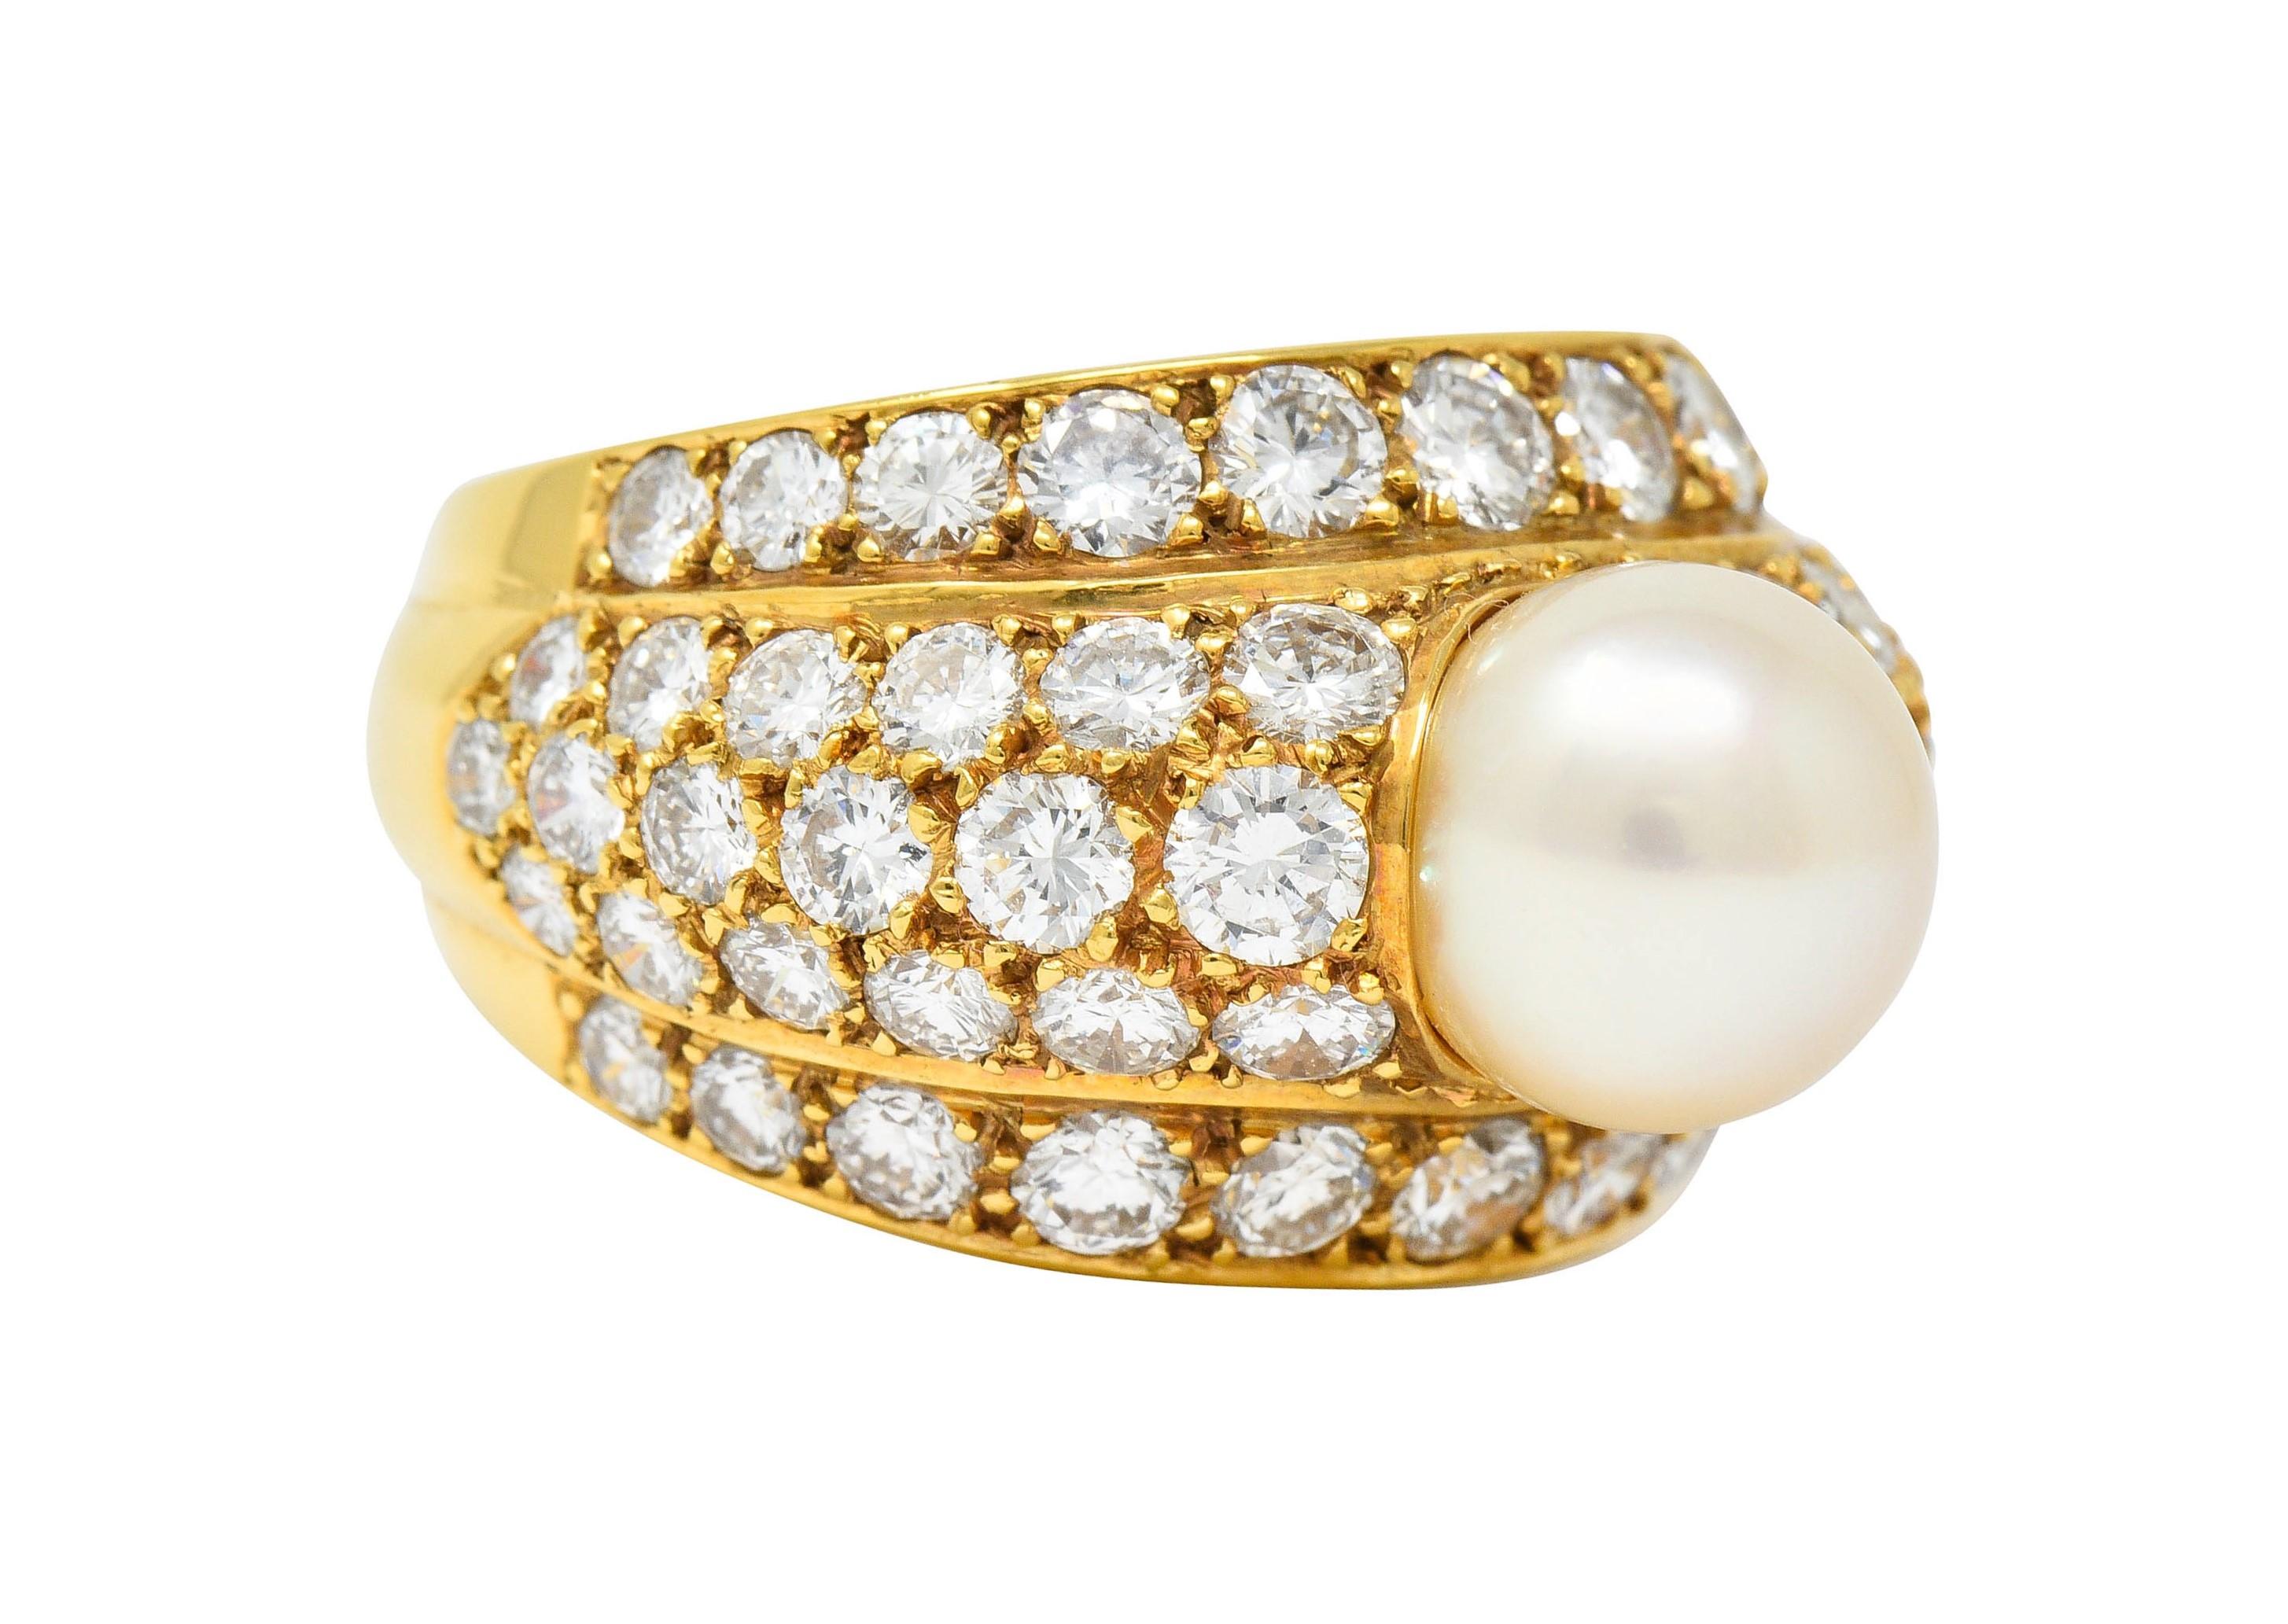 Band ring centers an 8.1 mm round cultured pearl, cream in body color, with rosé overtones and excellent luster

Surrounded by rows of pavé set round brilliant cut diamonds weighing in total approximately 2.80 carats; G/H color with VS